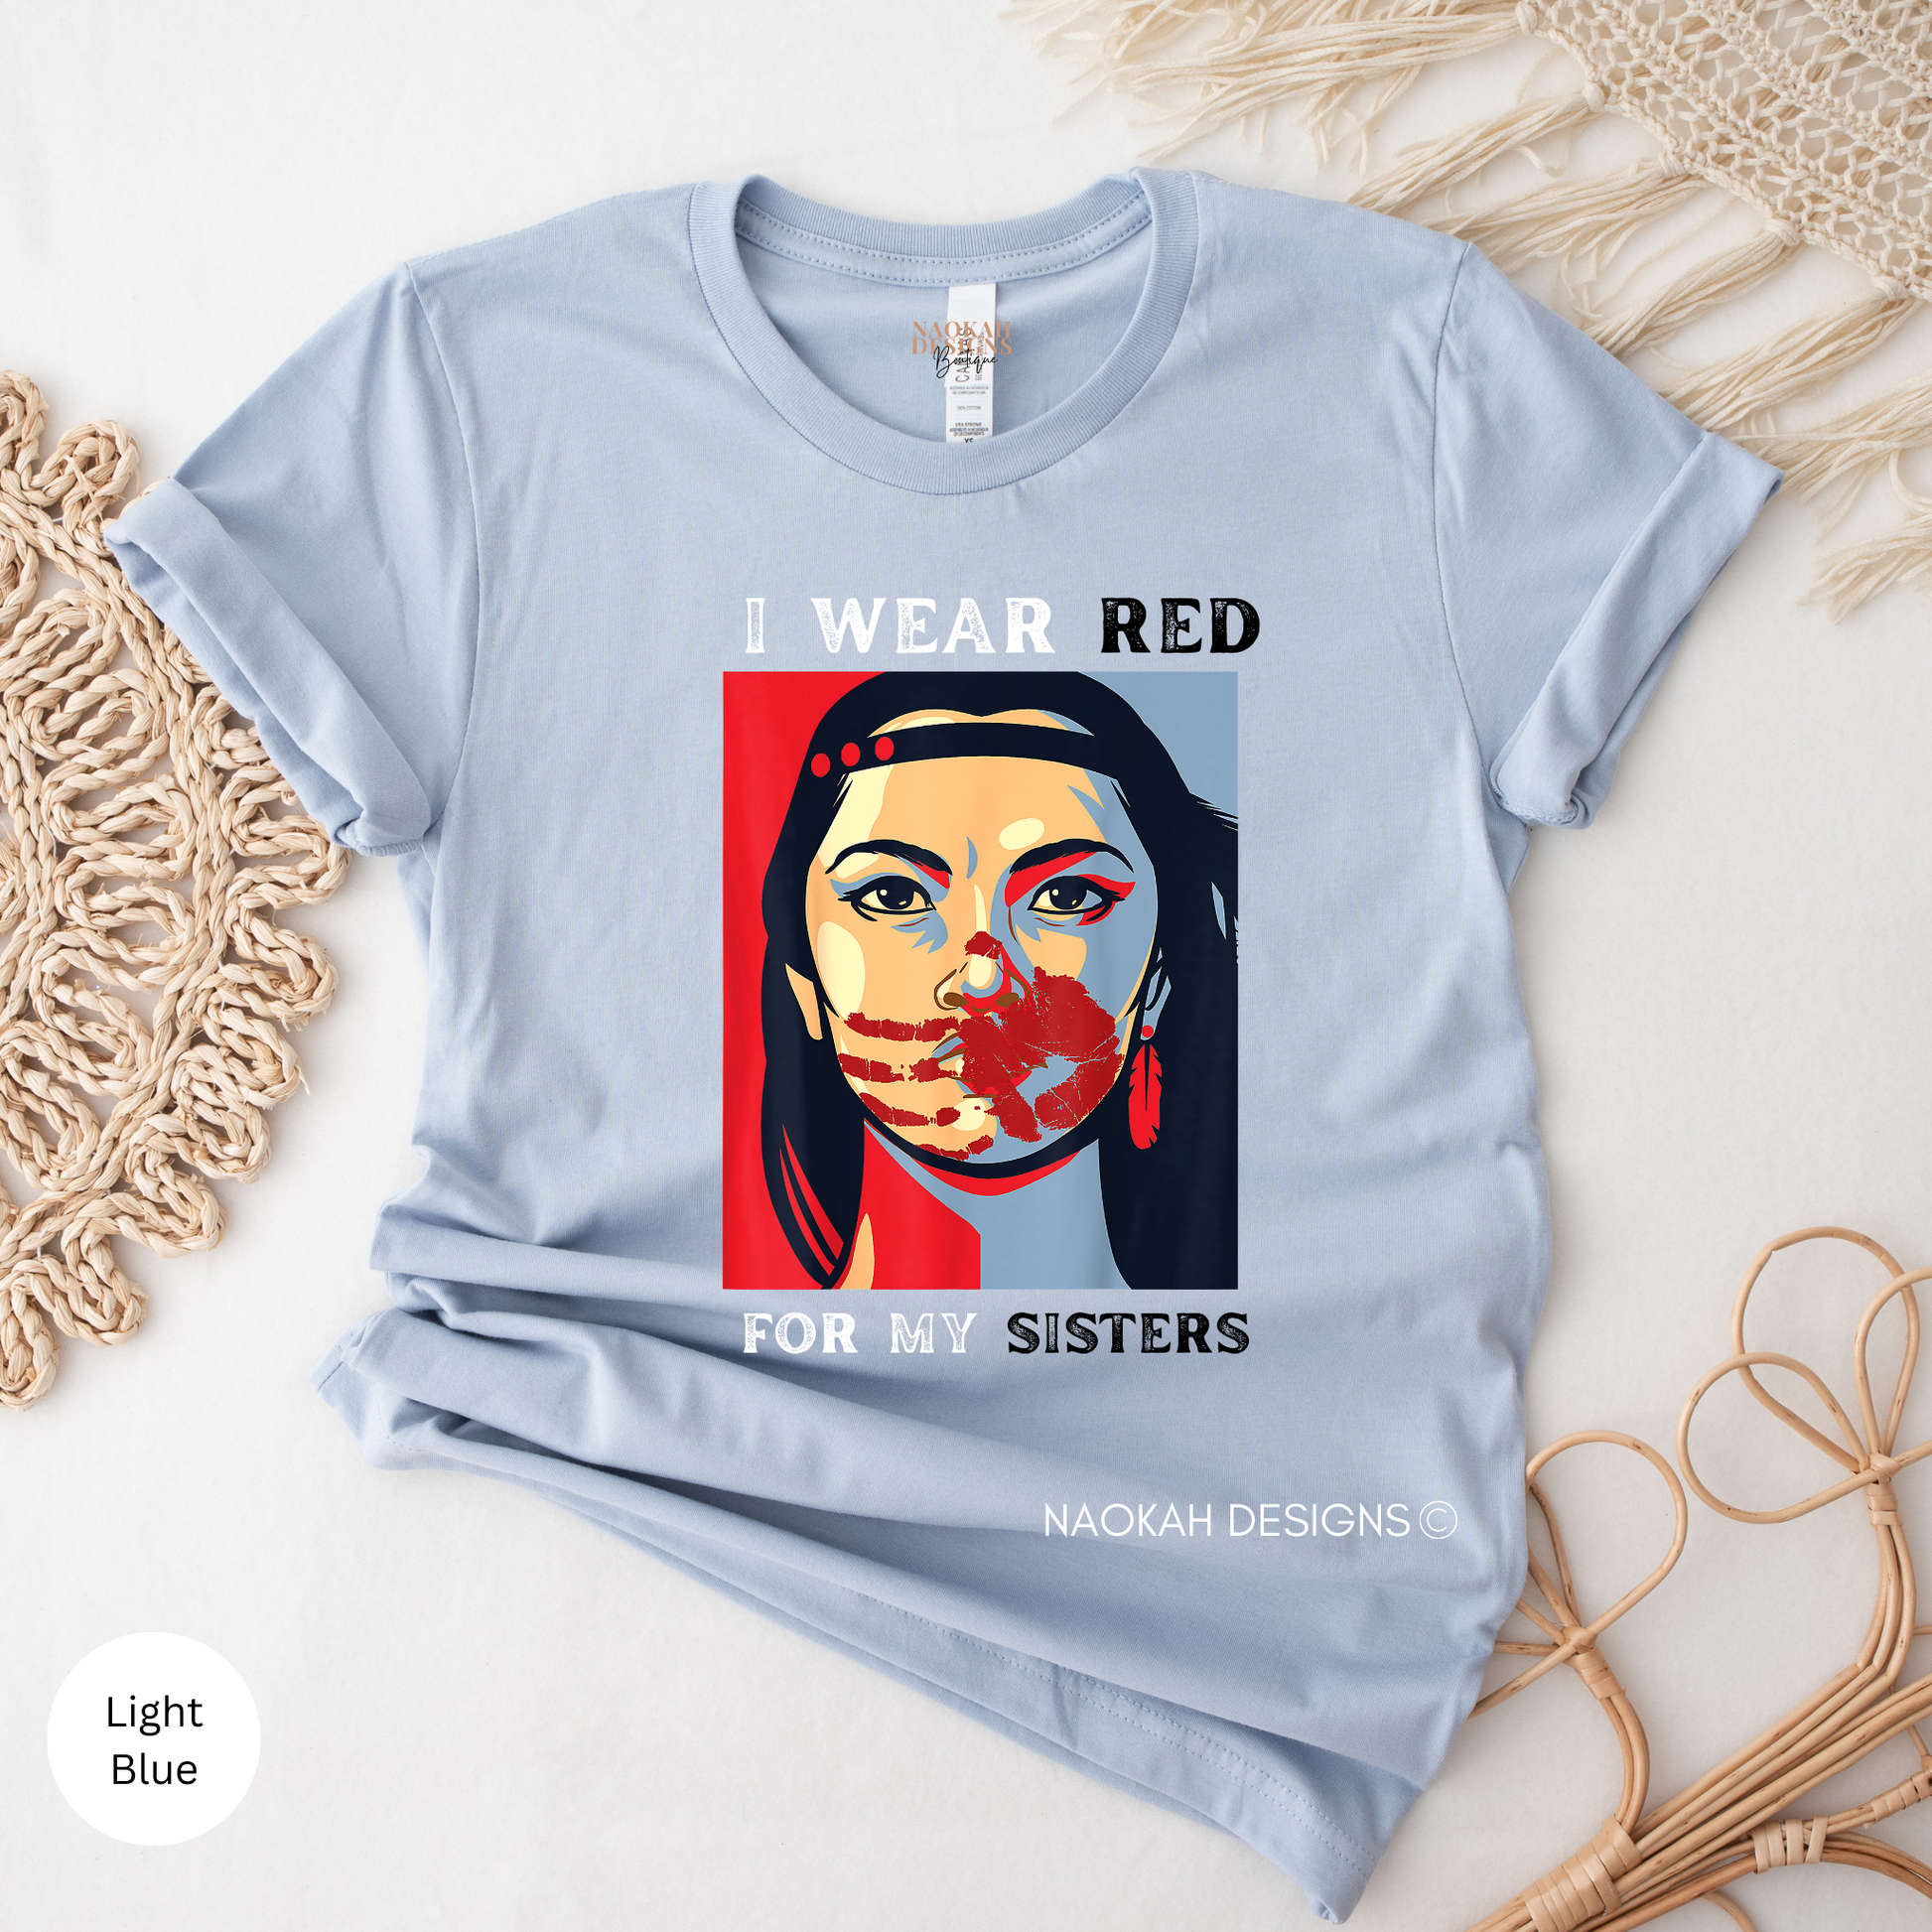 I Wear Red For My Sisters Shirt, Missing and Murdered Indigenous Women Shirt, Indigenous Owned Business, MMIW Shirt